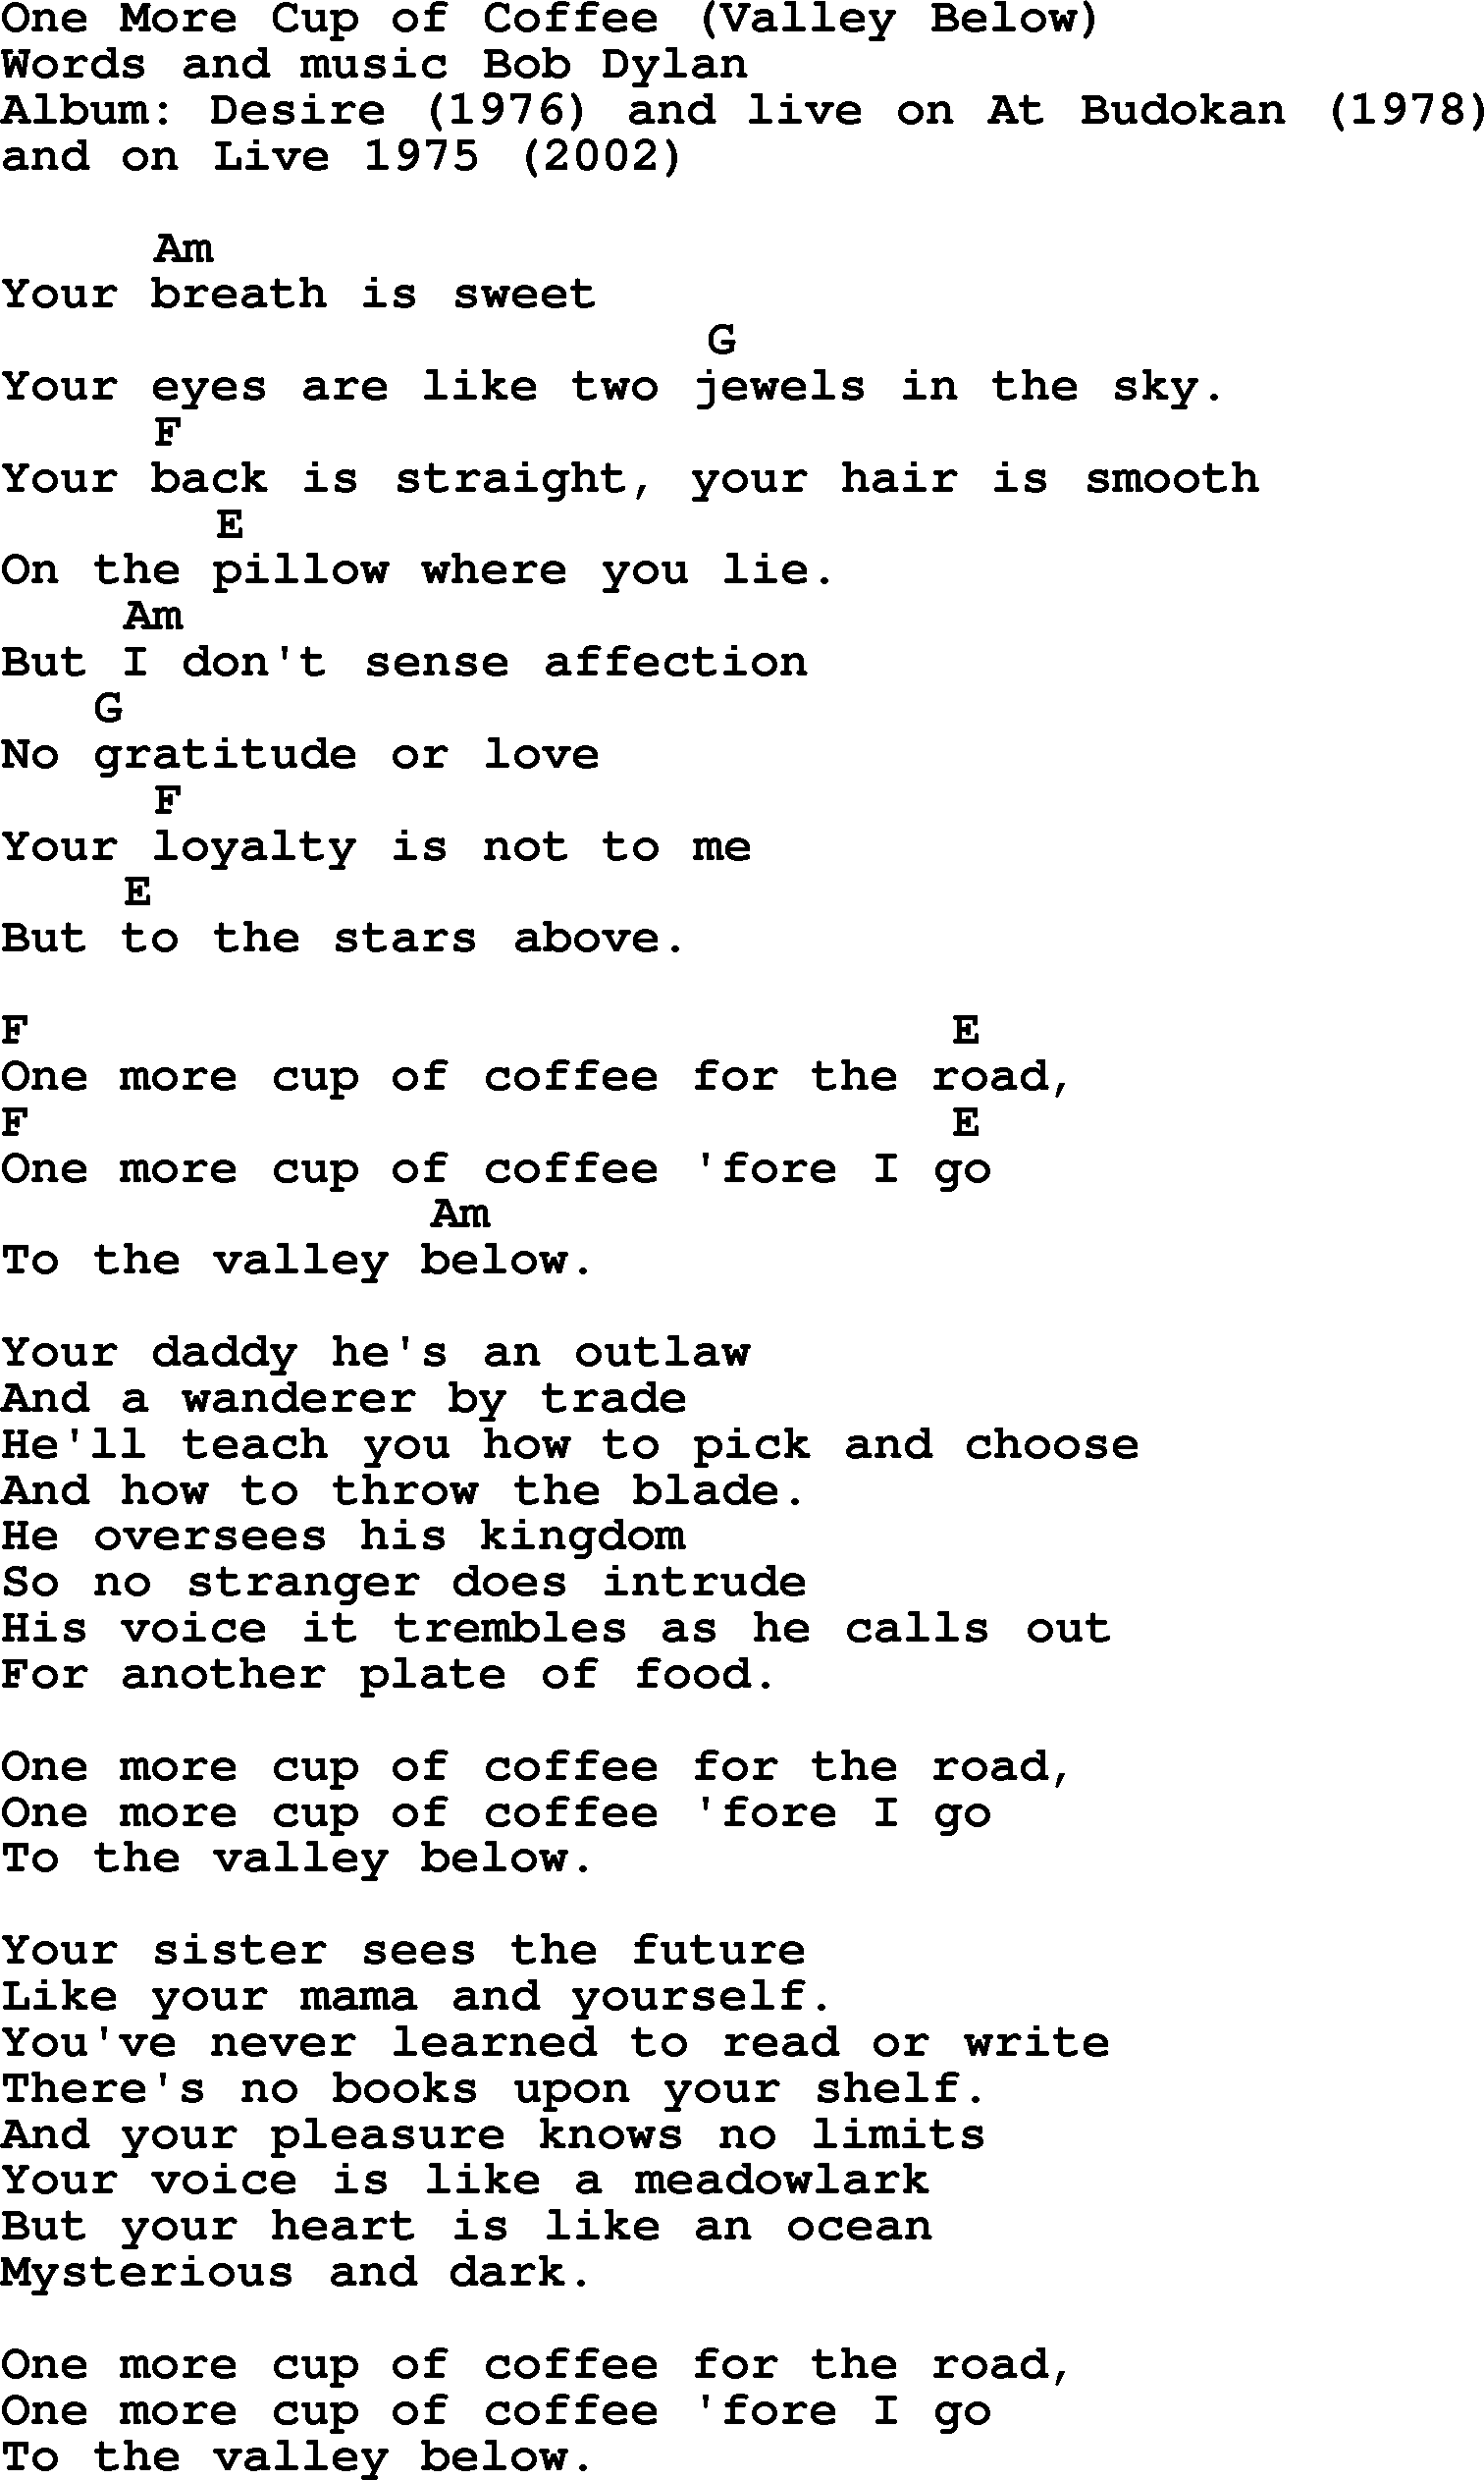 Bob Dylan song, lyrics with chords - One More Cup of Coffee (Valley Below)